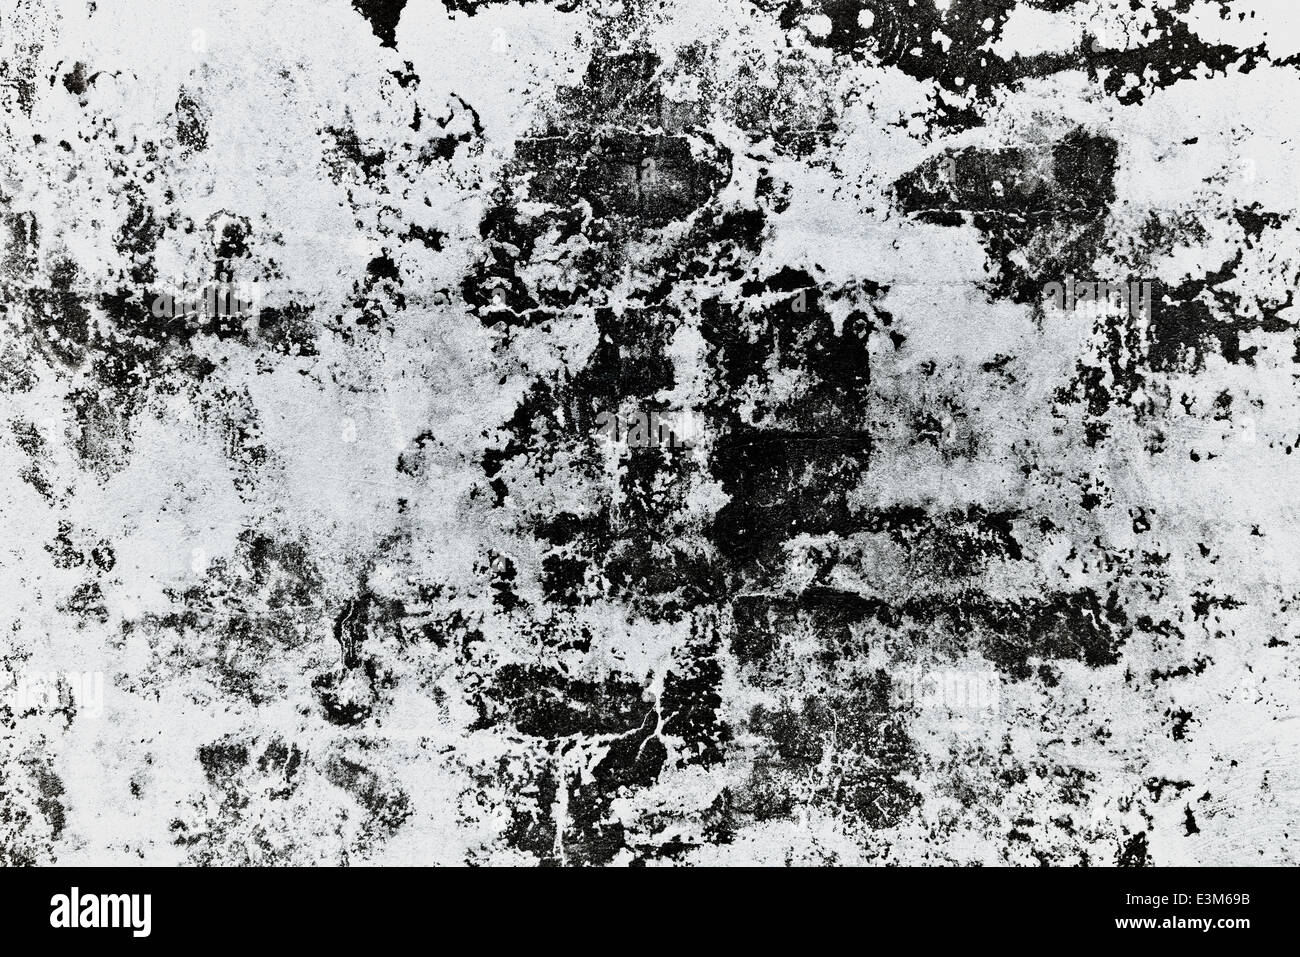 Grunge wall texture as urban background and copy space. Stock Photo